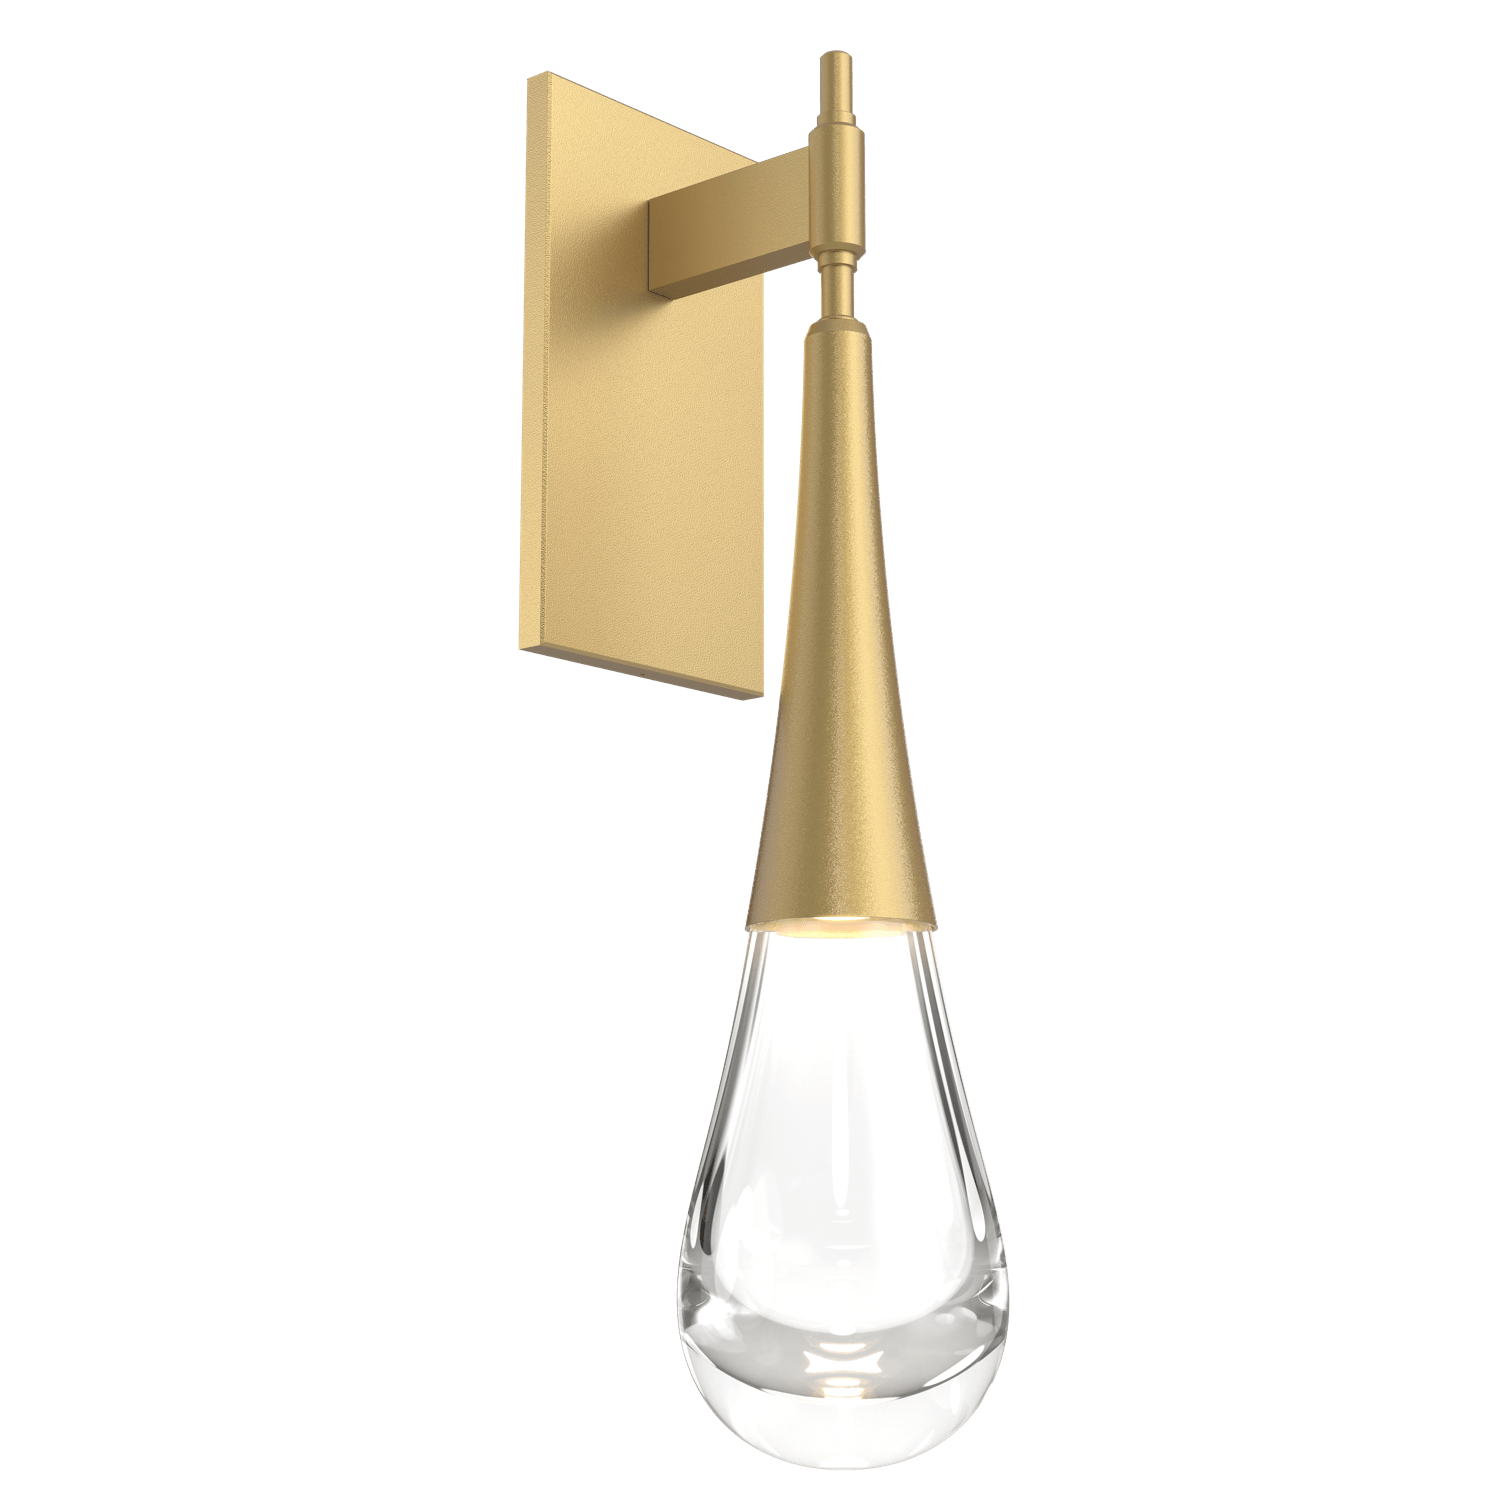 IDB0078-01-GB-Hammerton-Studio-Raindrop-wall-sconce-with-gilded-brass-finish-and-clear-blown-glass-shades-and-LED-lamping